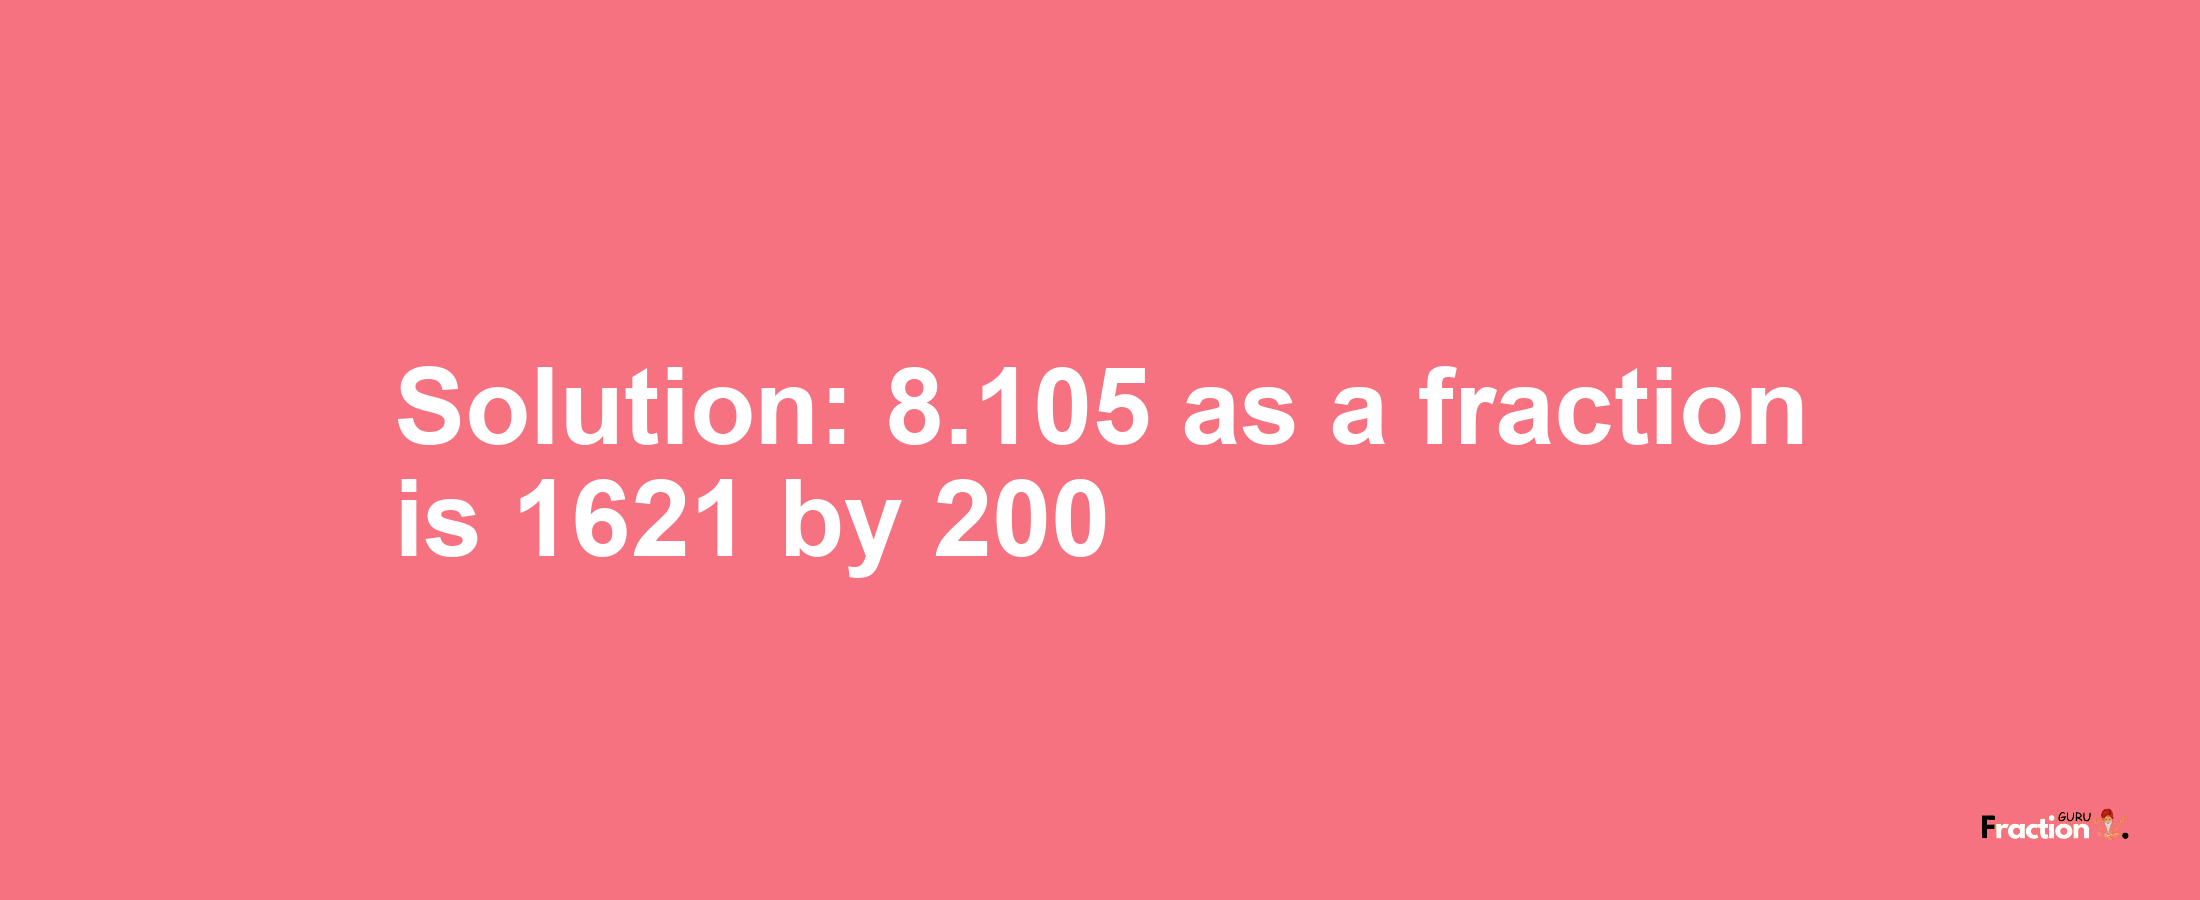 Solution:8.105 as a fraction is 1621/200